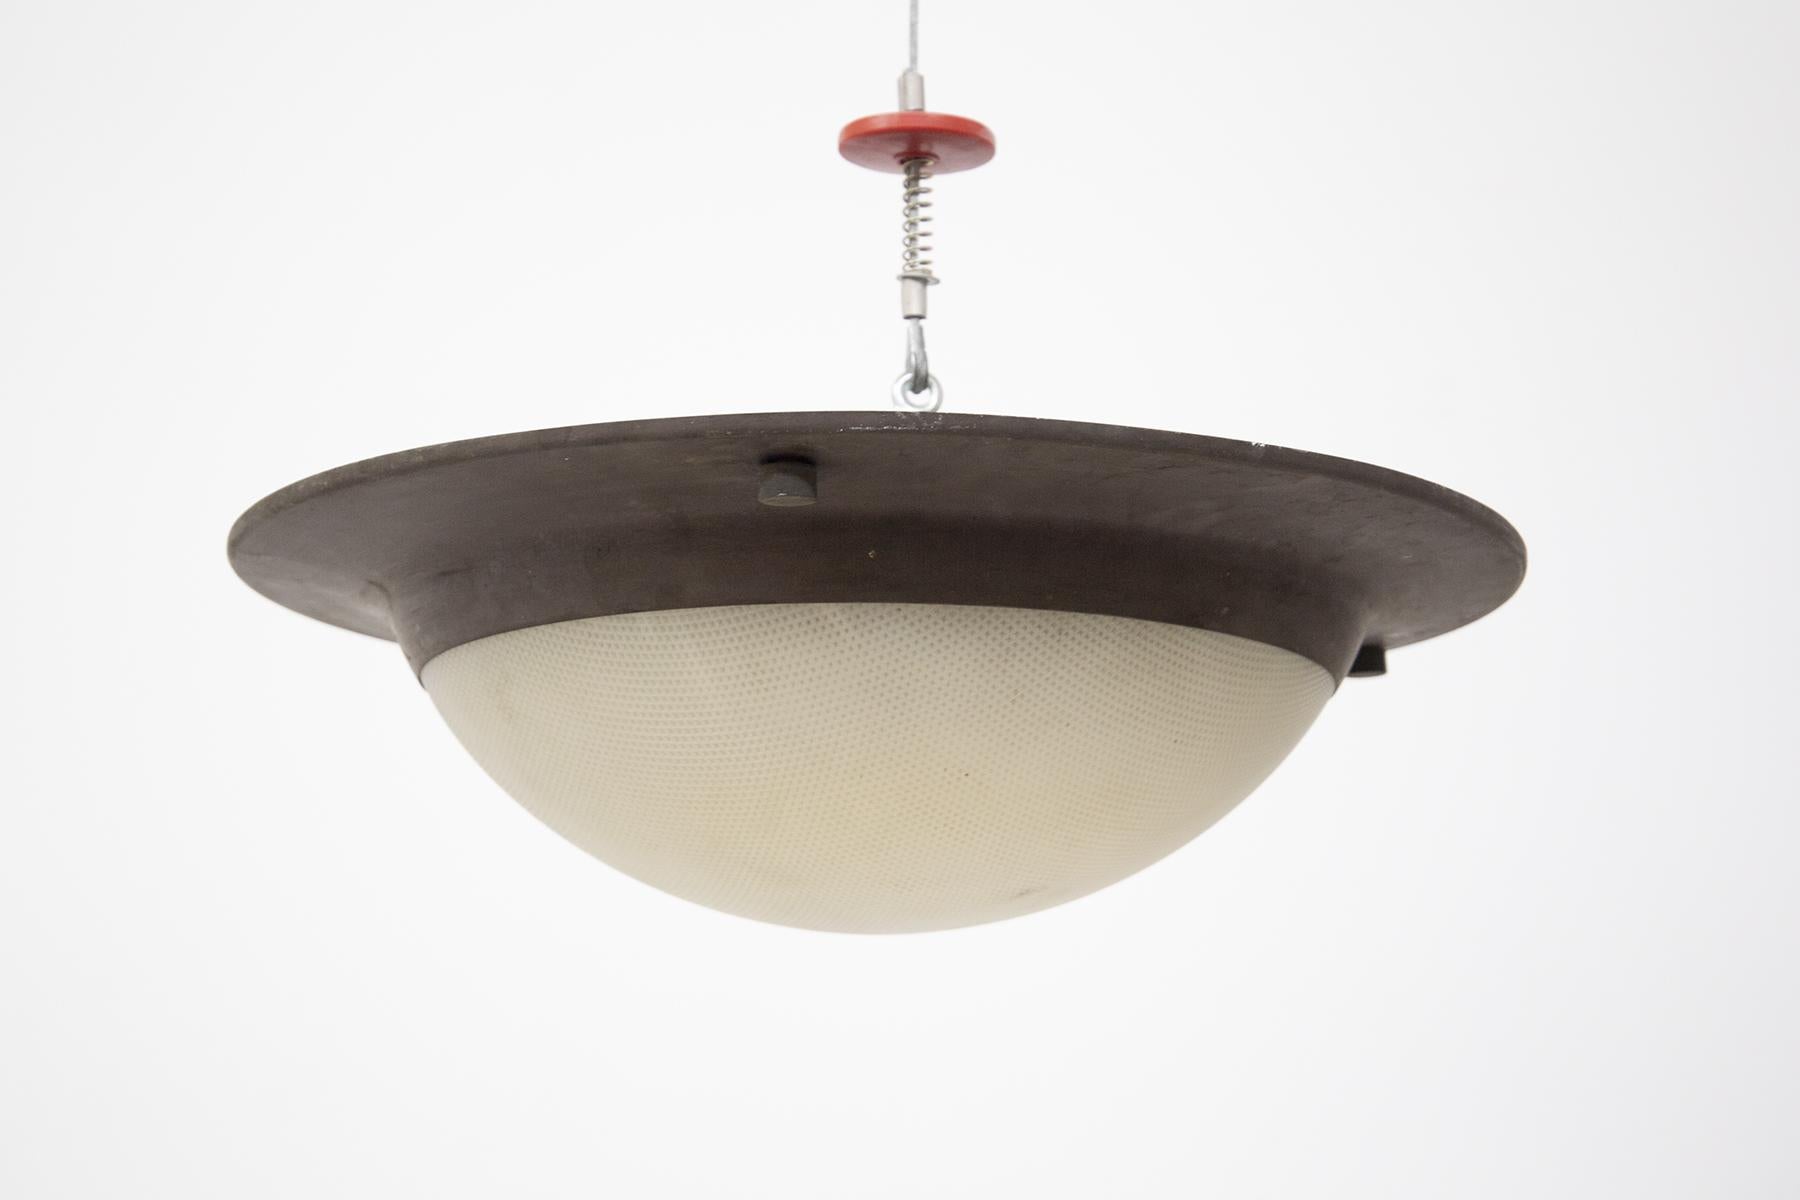 Gorgeous vintage Italian ceiling lamp belonging to Vip's Residence in Milan, from the 70's of fine Italian craftsmanship.
The lamp has a hemispherical shape and resembles that of a ceiling light. The central copro is more protruding and is white,